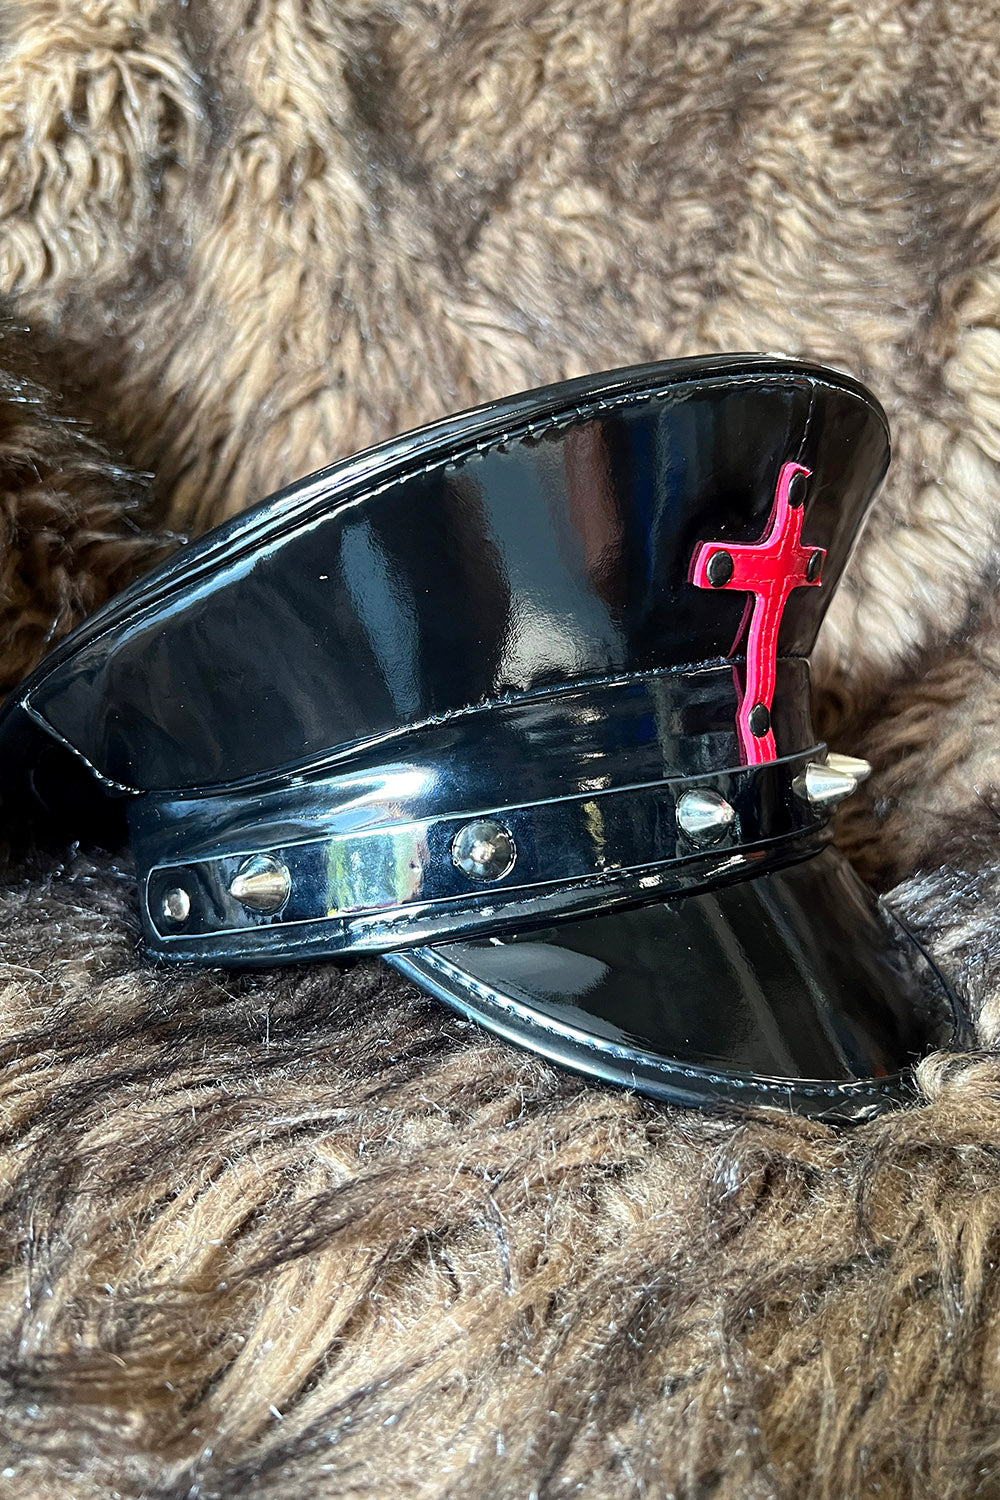 Blood Oath Spiked Captain Hat [RED CROSS]